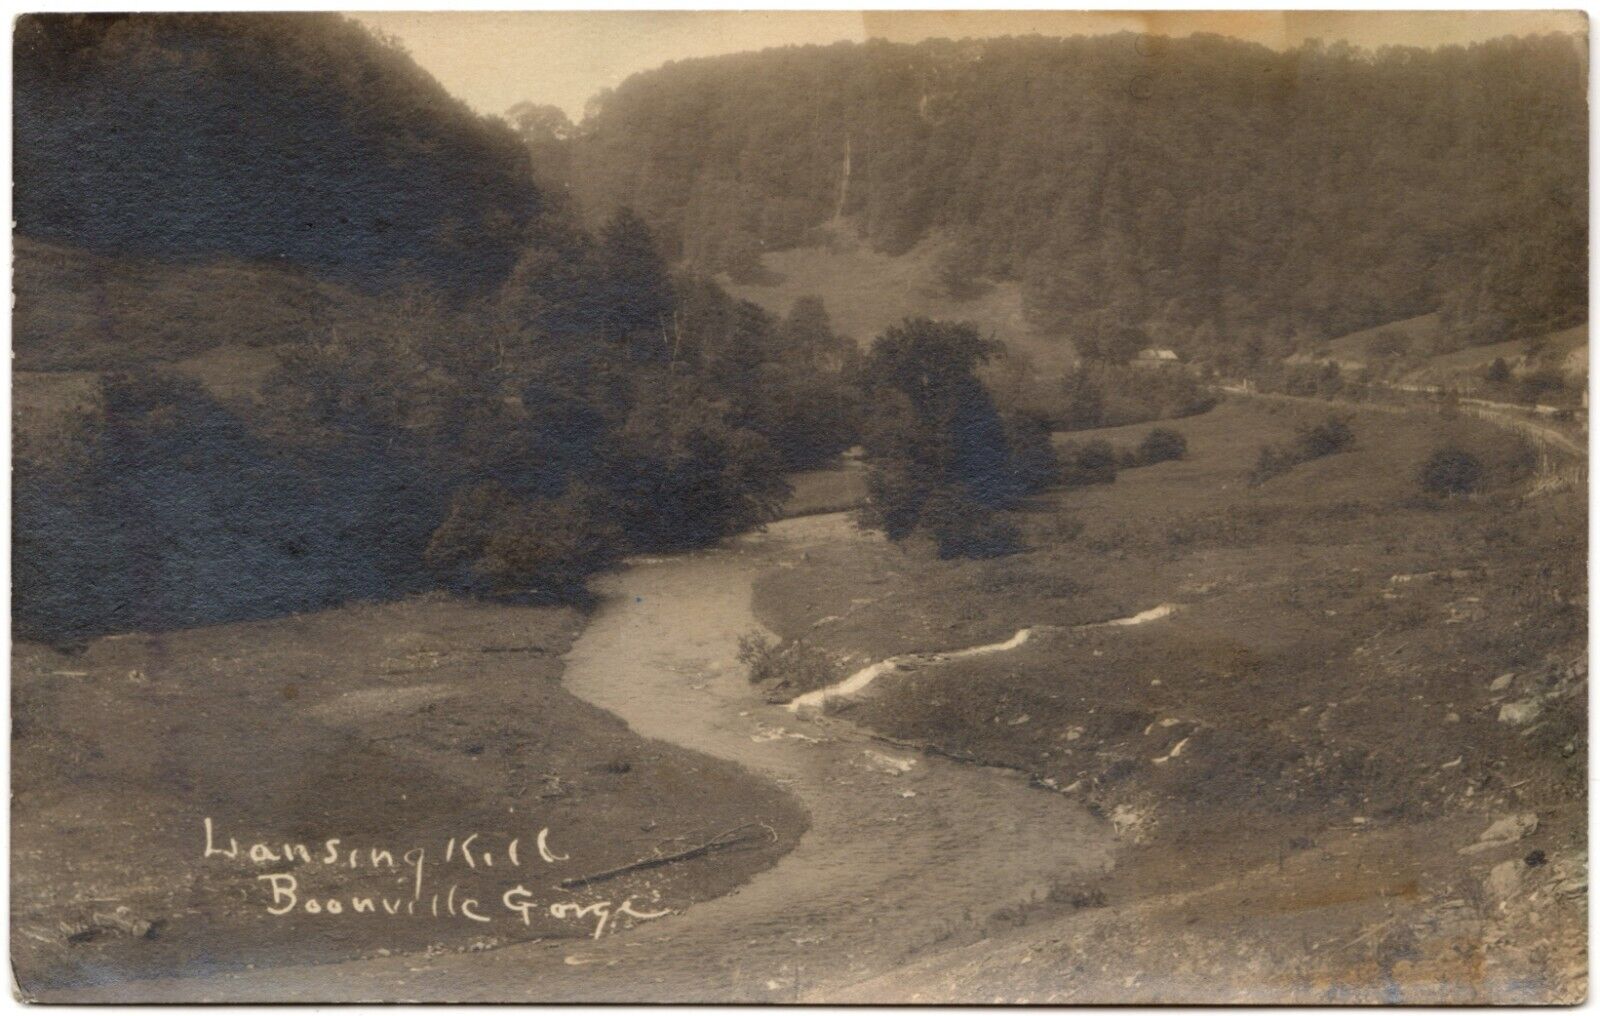 BOONVILLE GORGE, NY - RPPC Lansing Kill River New York Real Photo Postcard 1920s